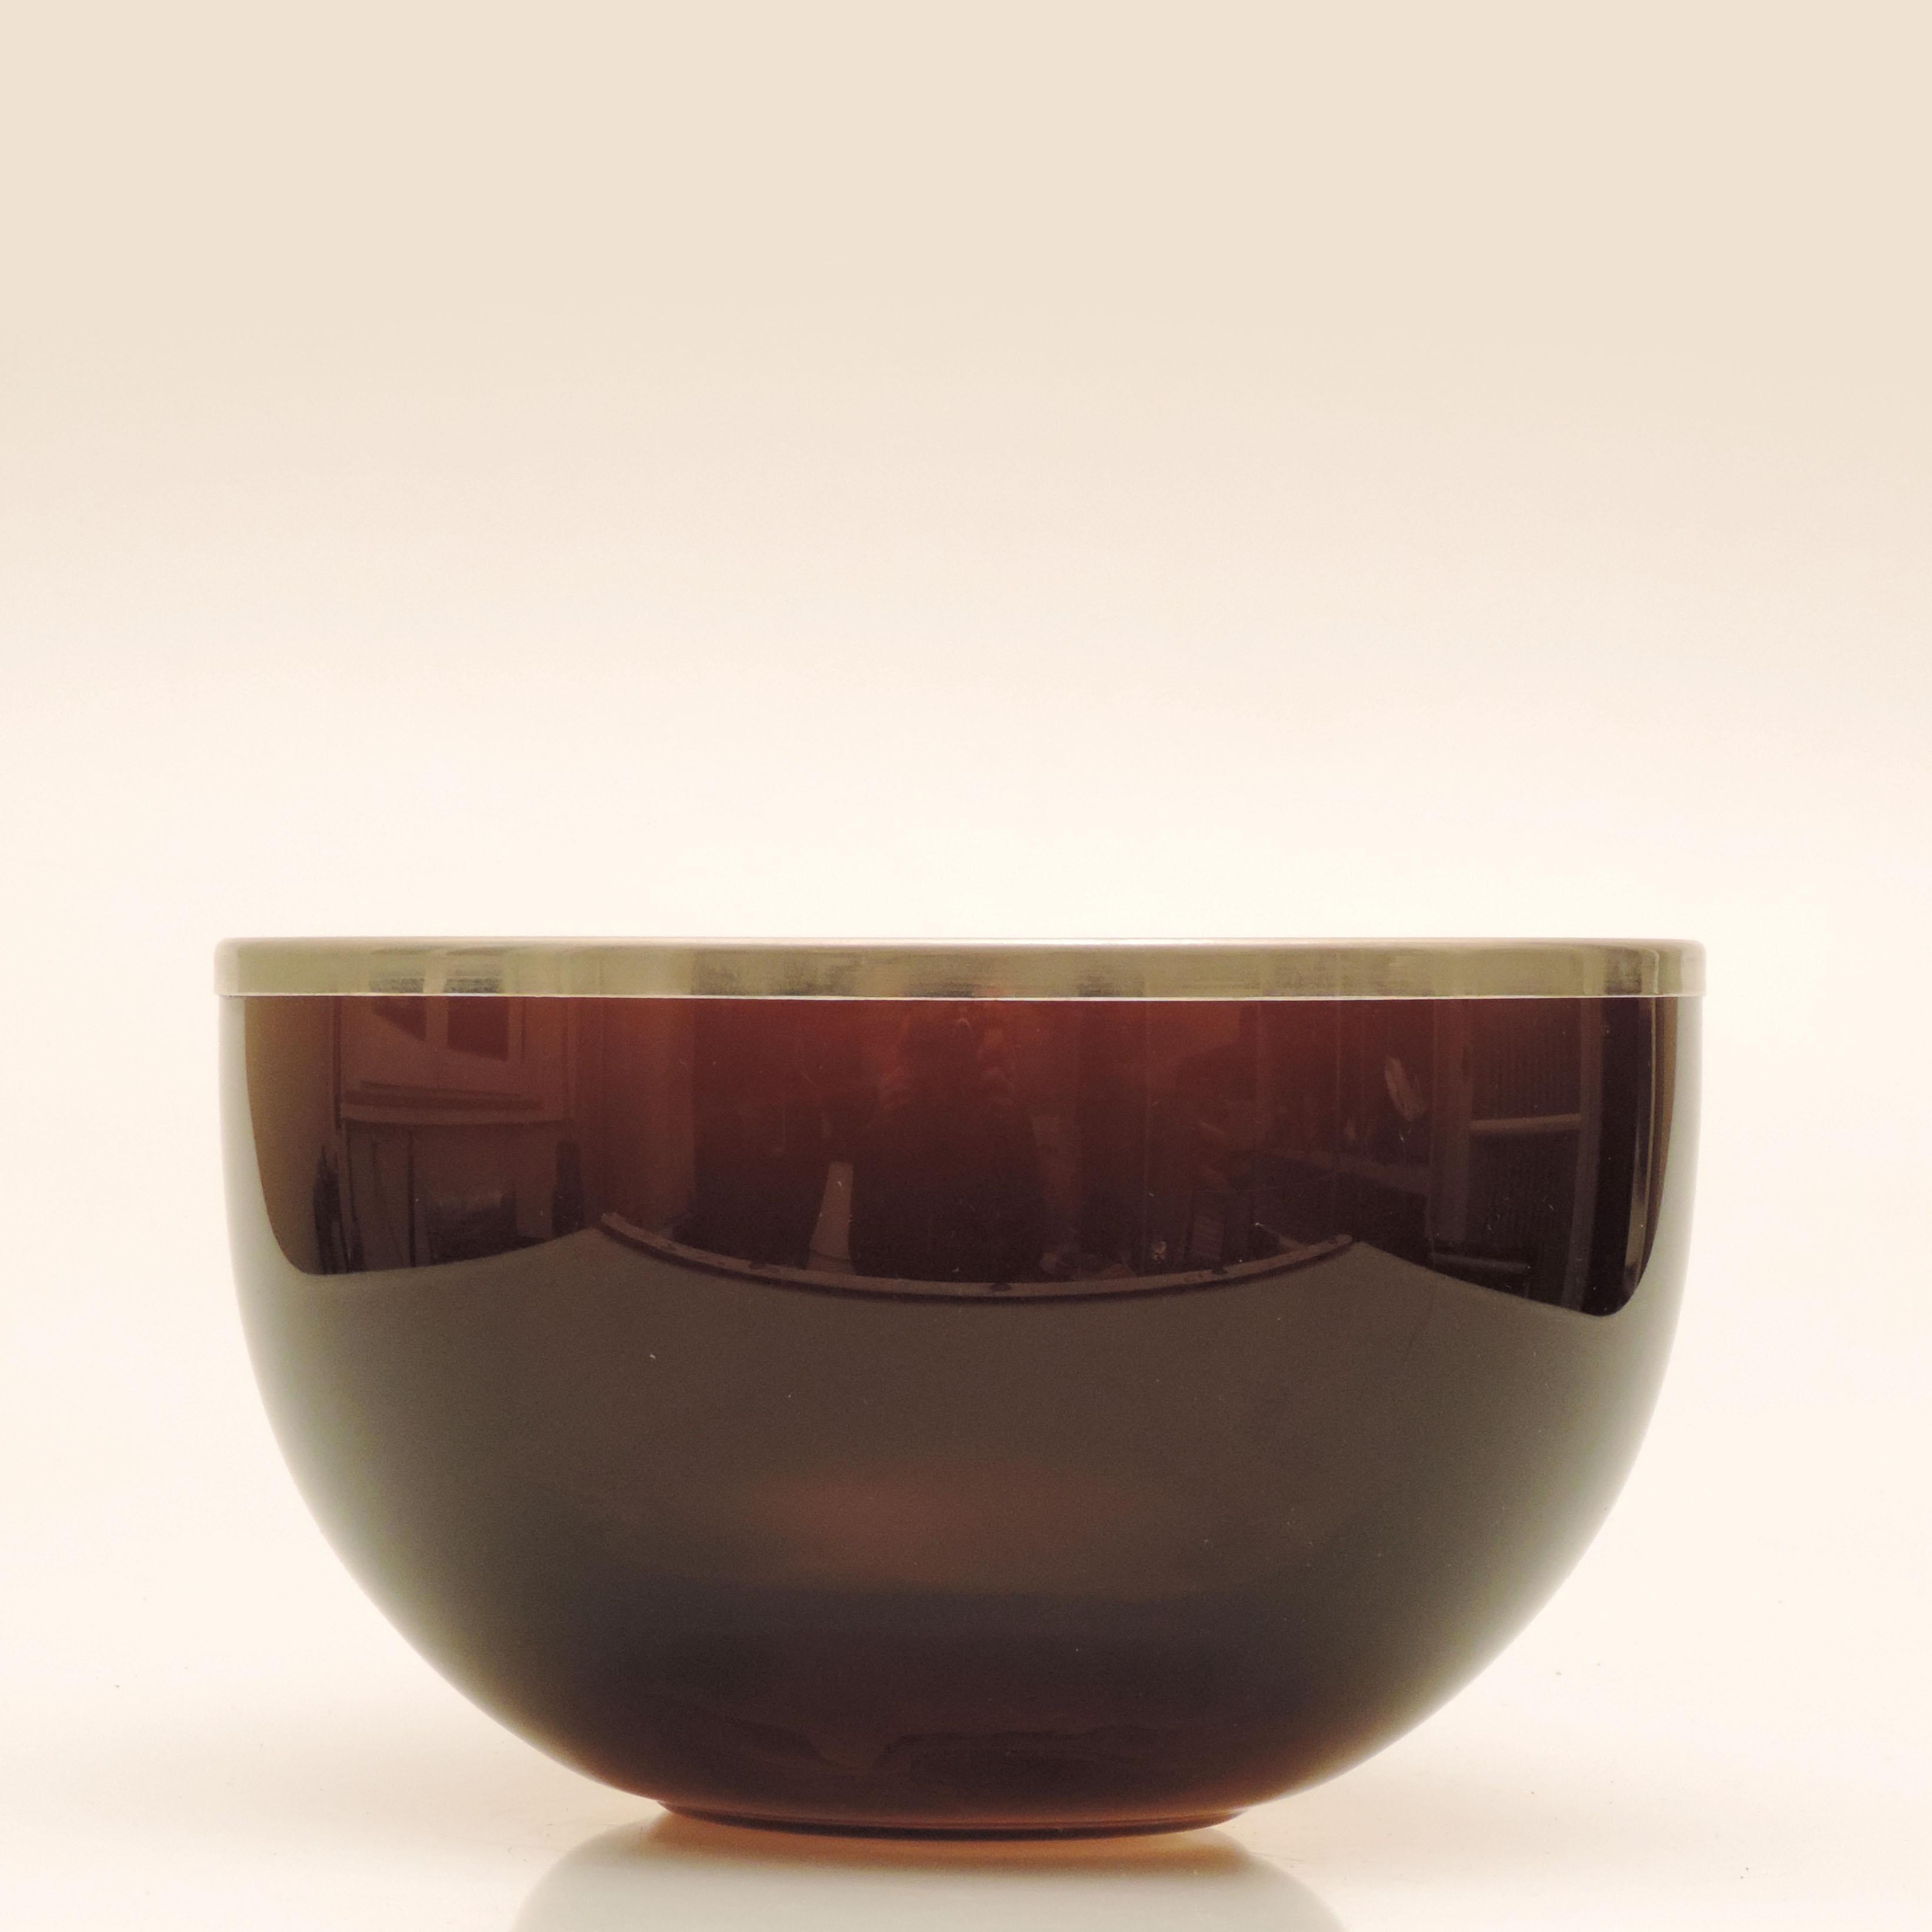 Italian 1970s serving bowl in brown Murano glass and nickel rim.
Attributed to Gabriella Crespi.